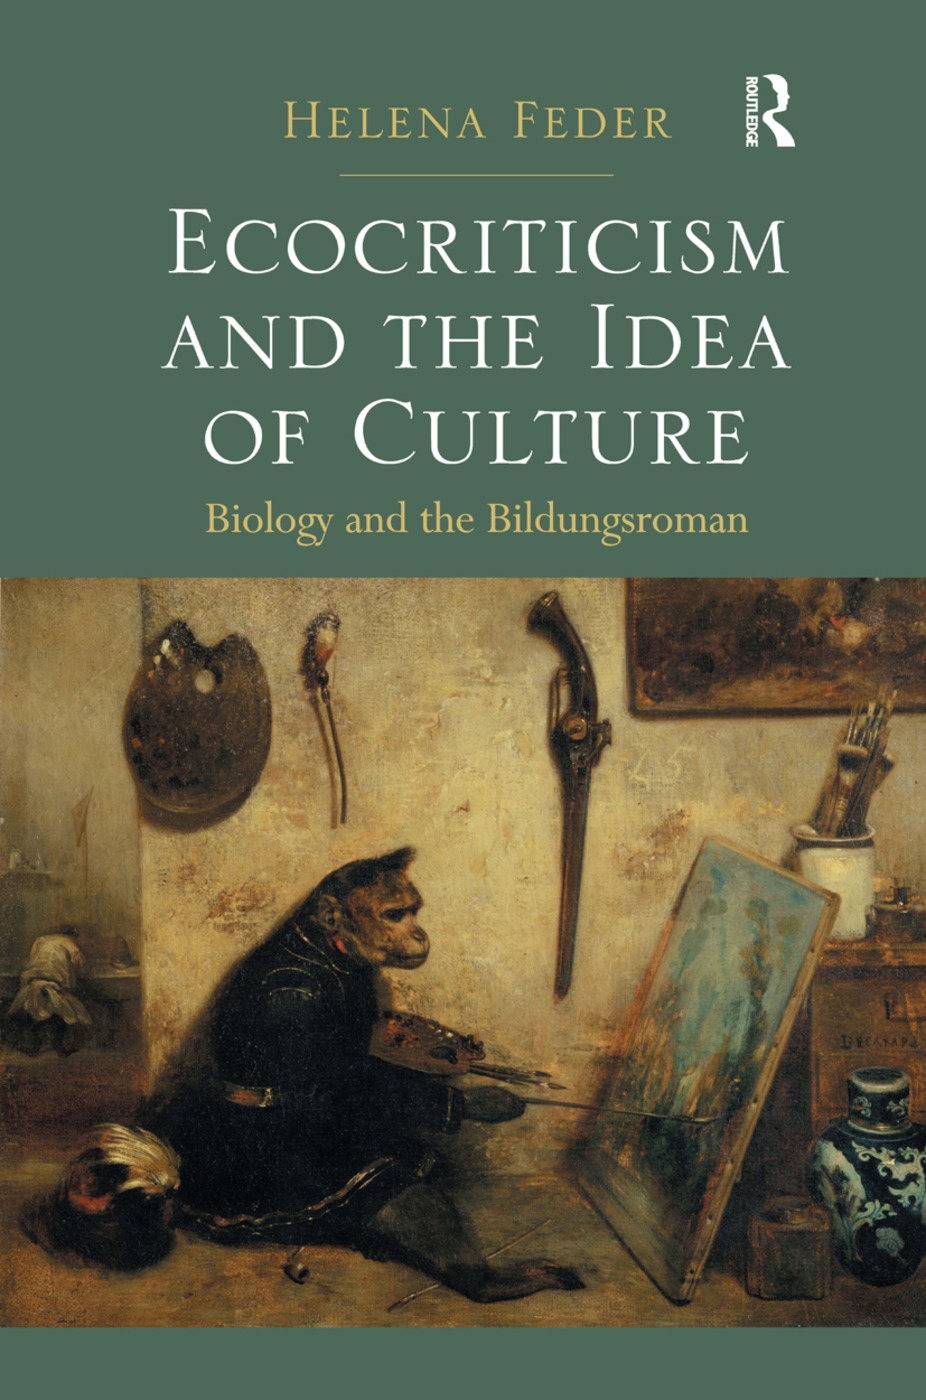 Ecocriticism and the Idea of Culture: Biology and the Bildungsroman. Helena Feder